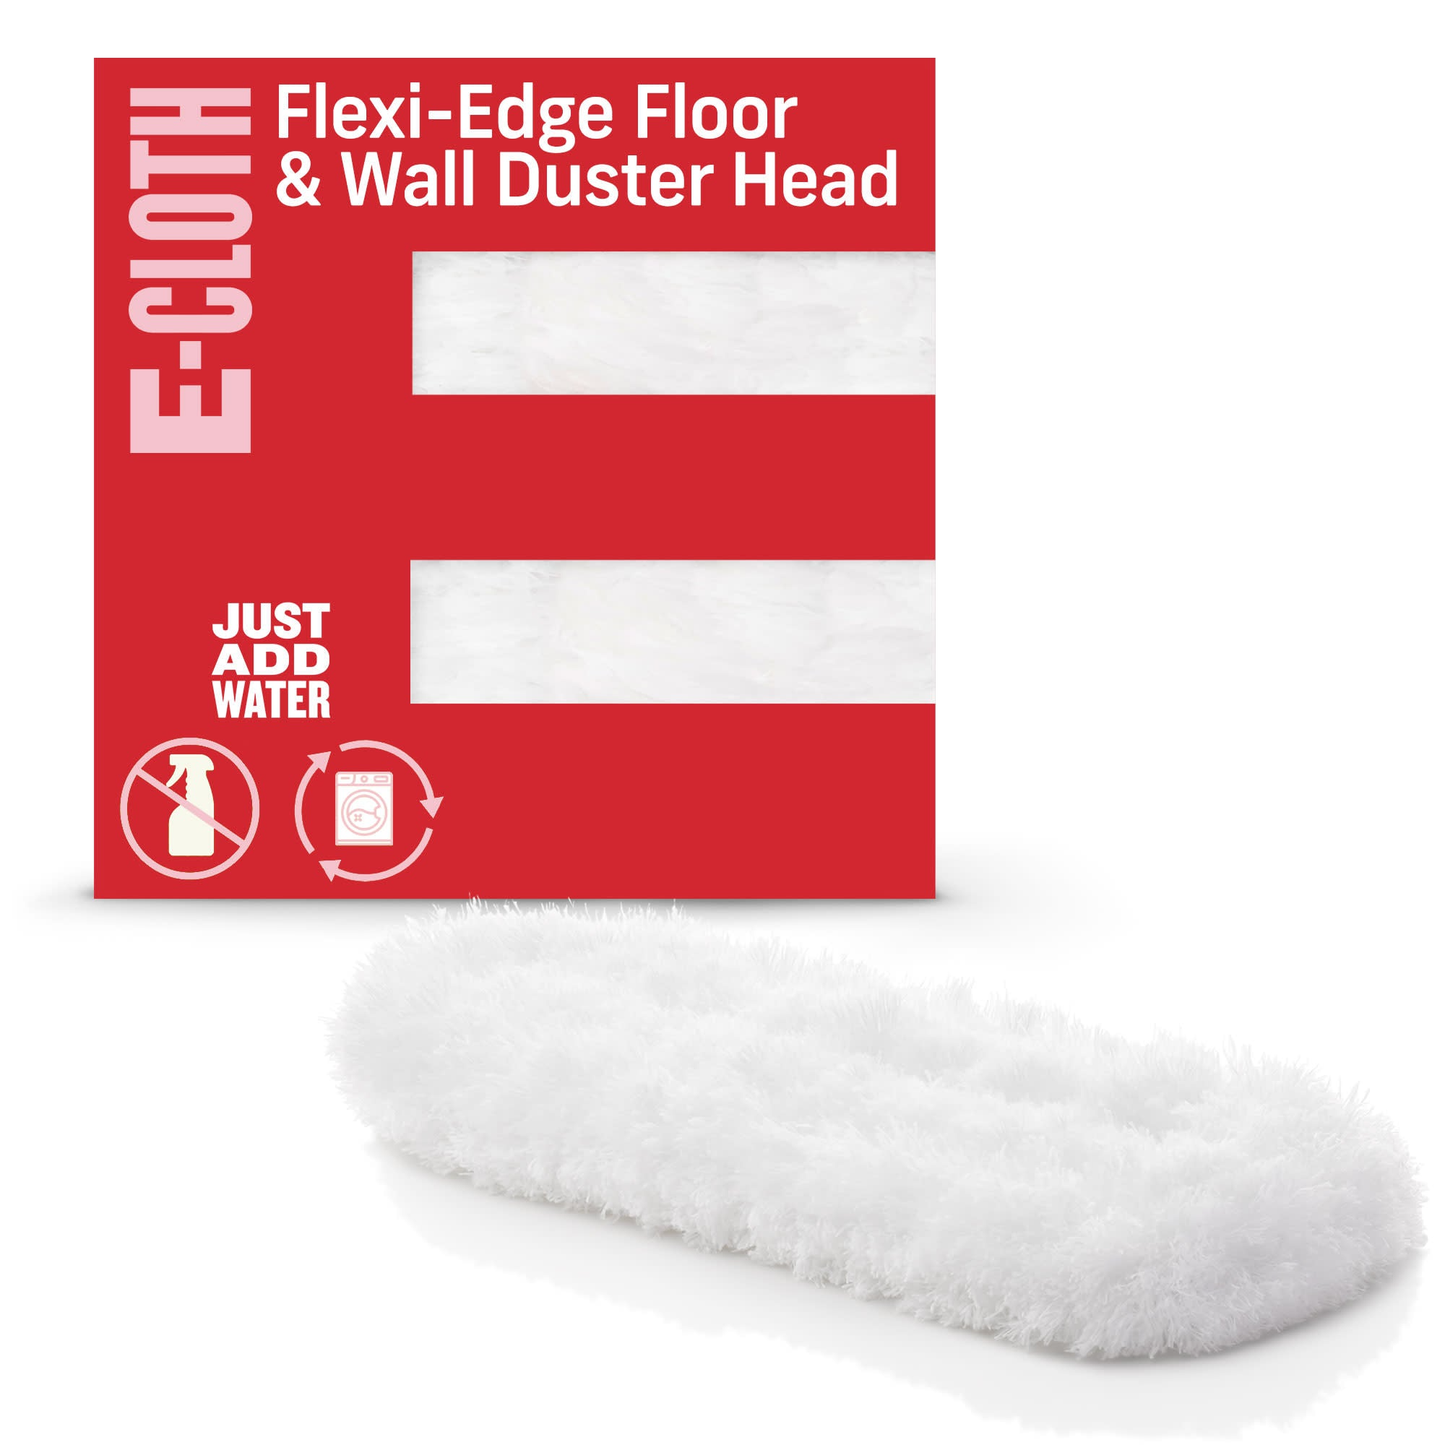 E-Cloth Replacement Head for Flexi-Edge Floor & Wall Duster